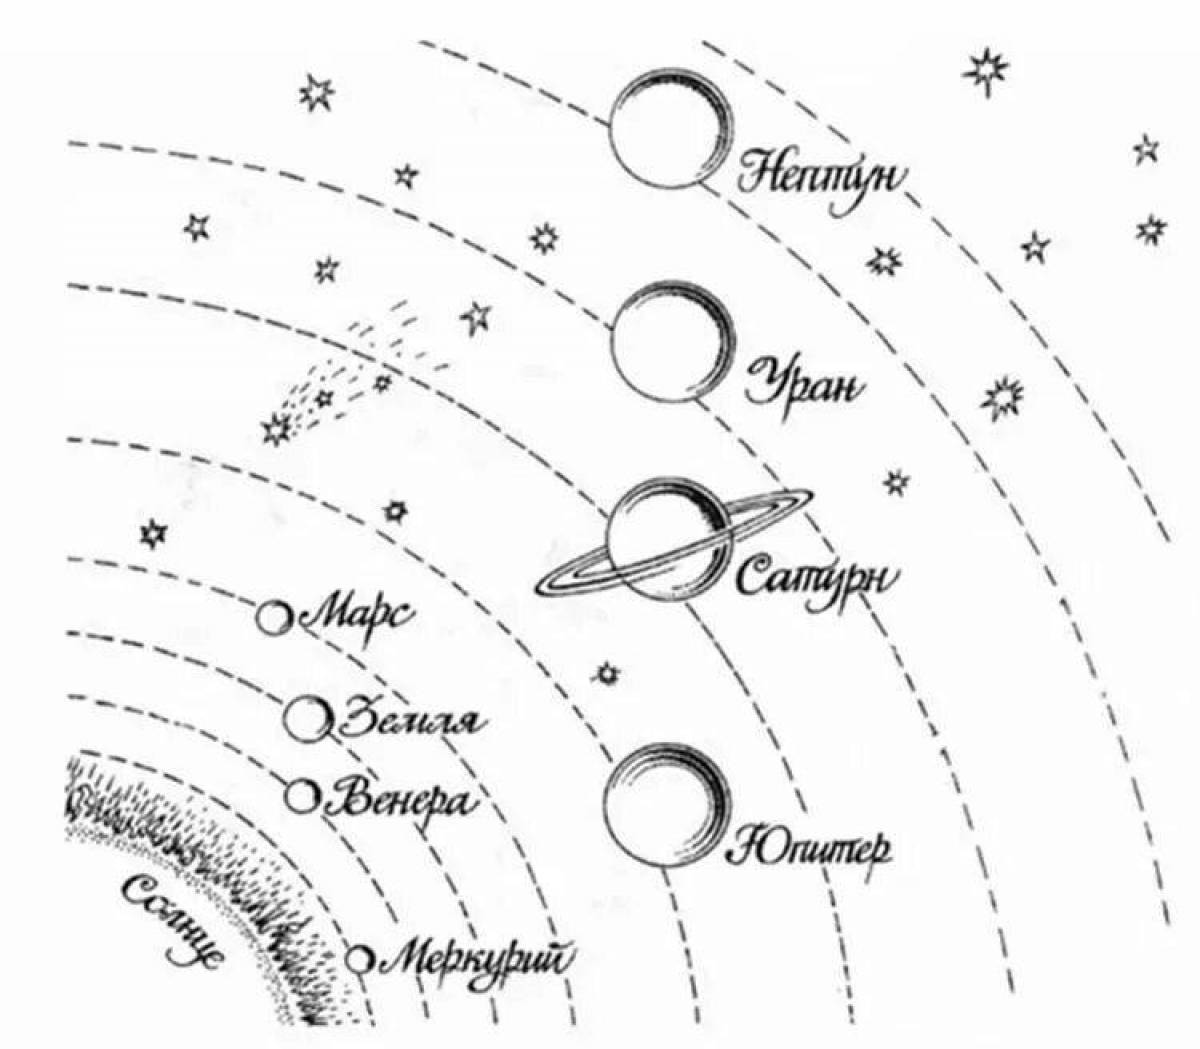 Planets of the solar system in order from the sun with names #3